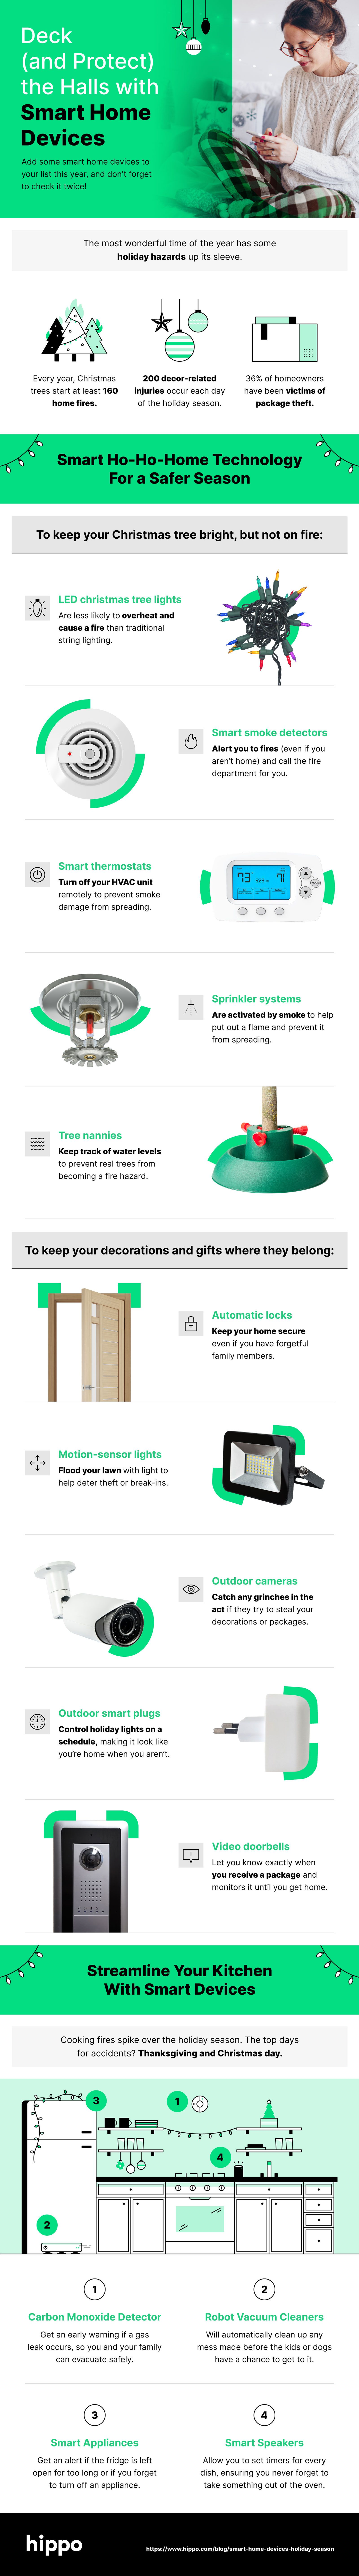 Infographic with illustrations of smart home devices that protect your home during the holidays